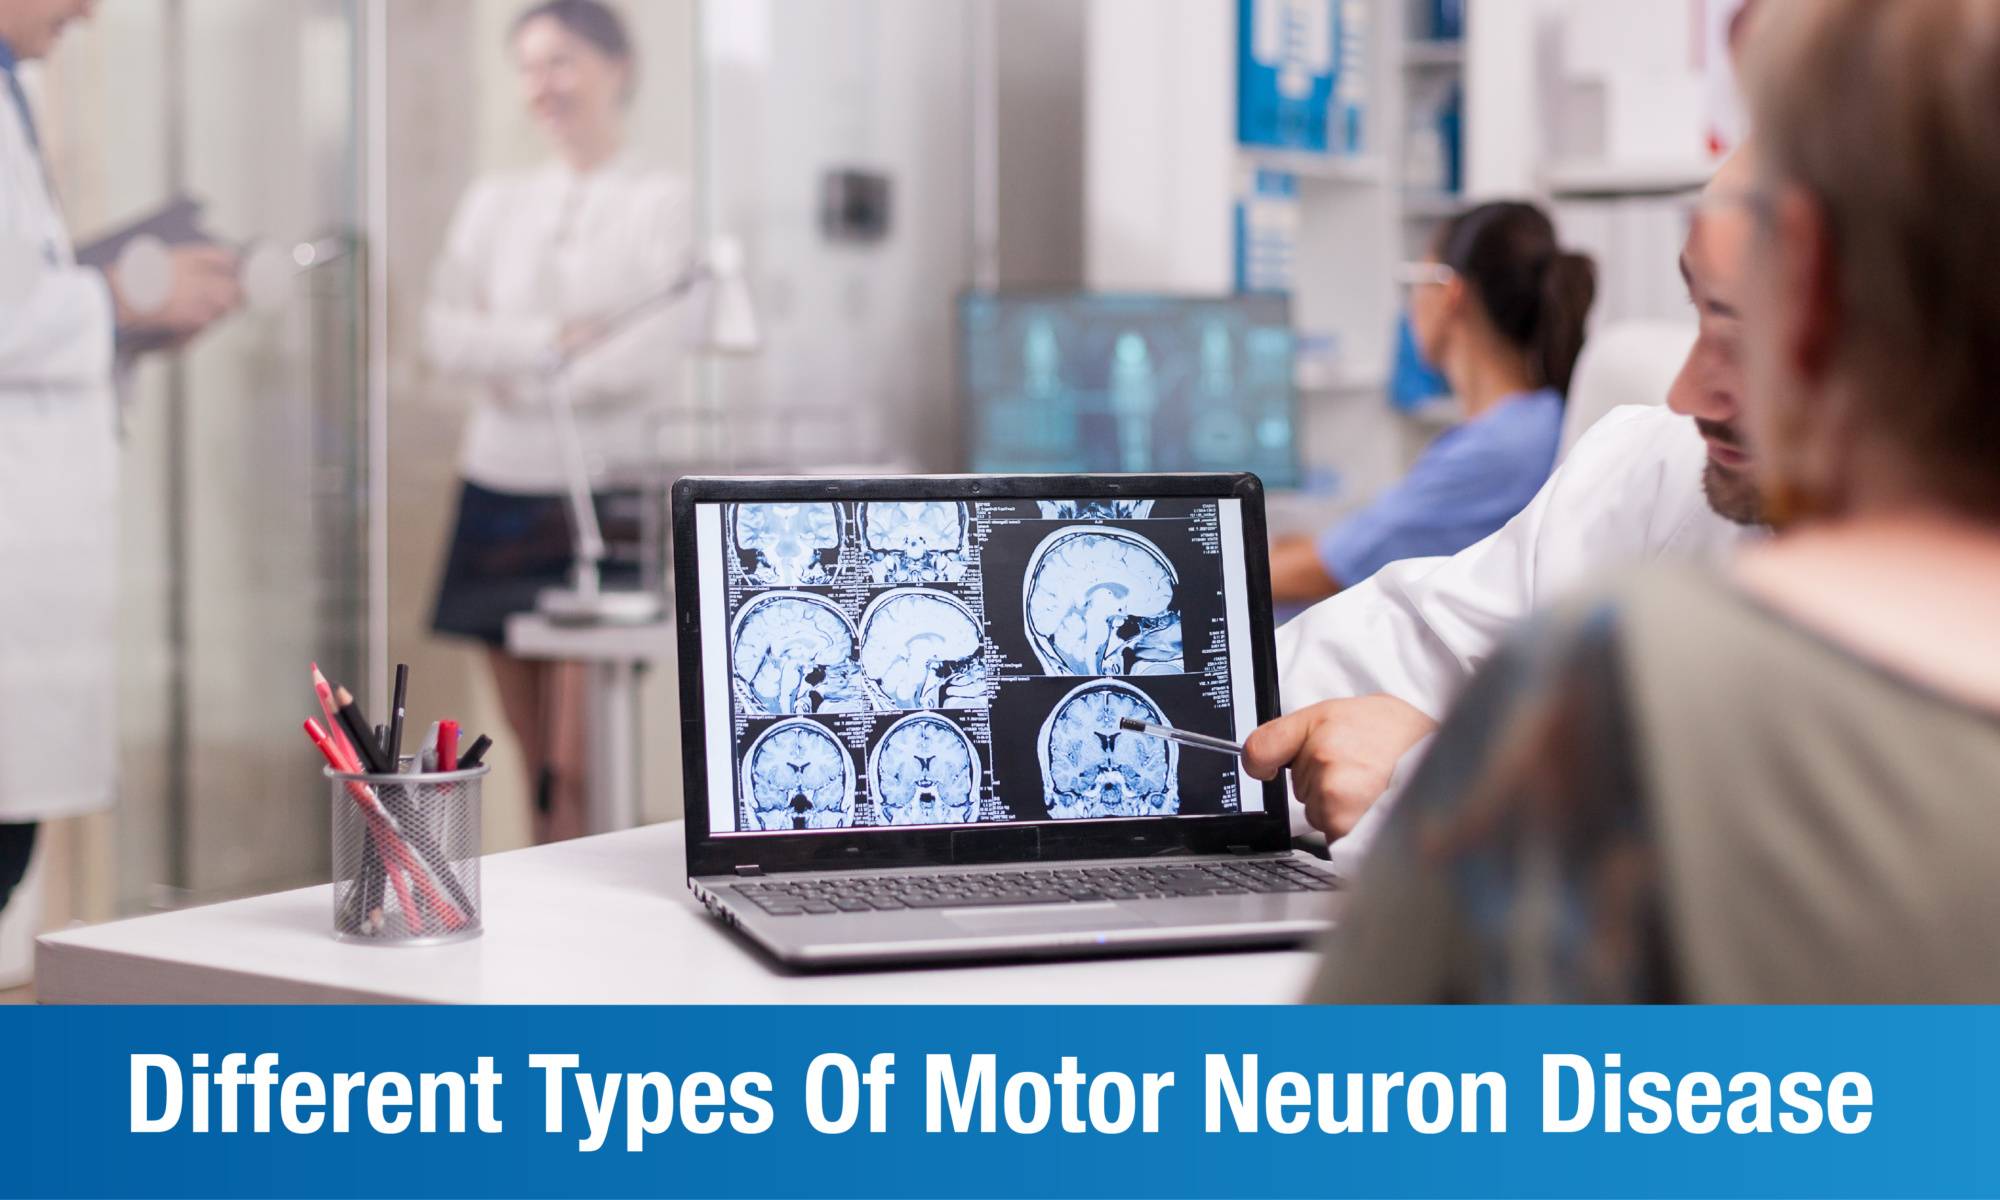 What Are The Different Types Of Motor Neuron Disease?